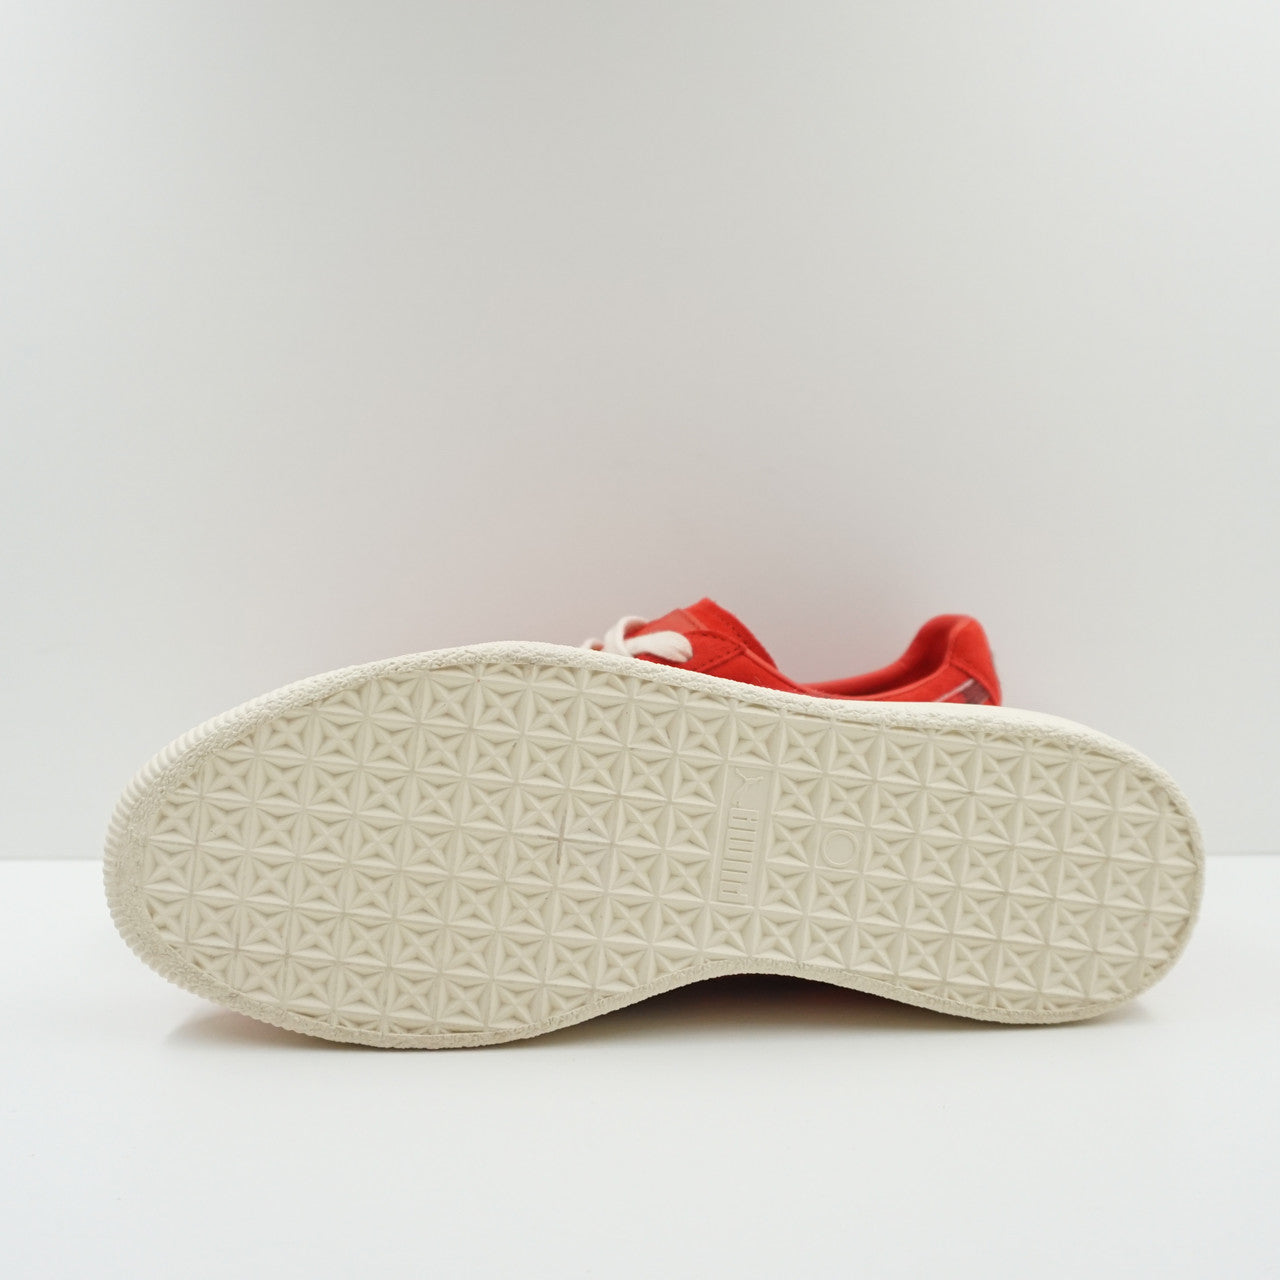 Puma Clyde Packer Shoes Cow Suit Red